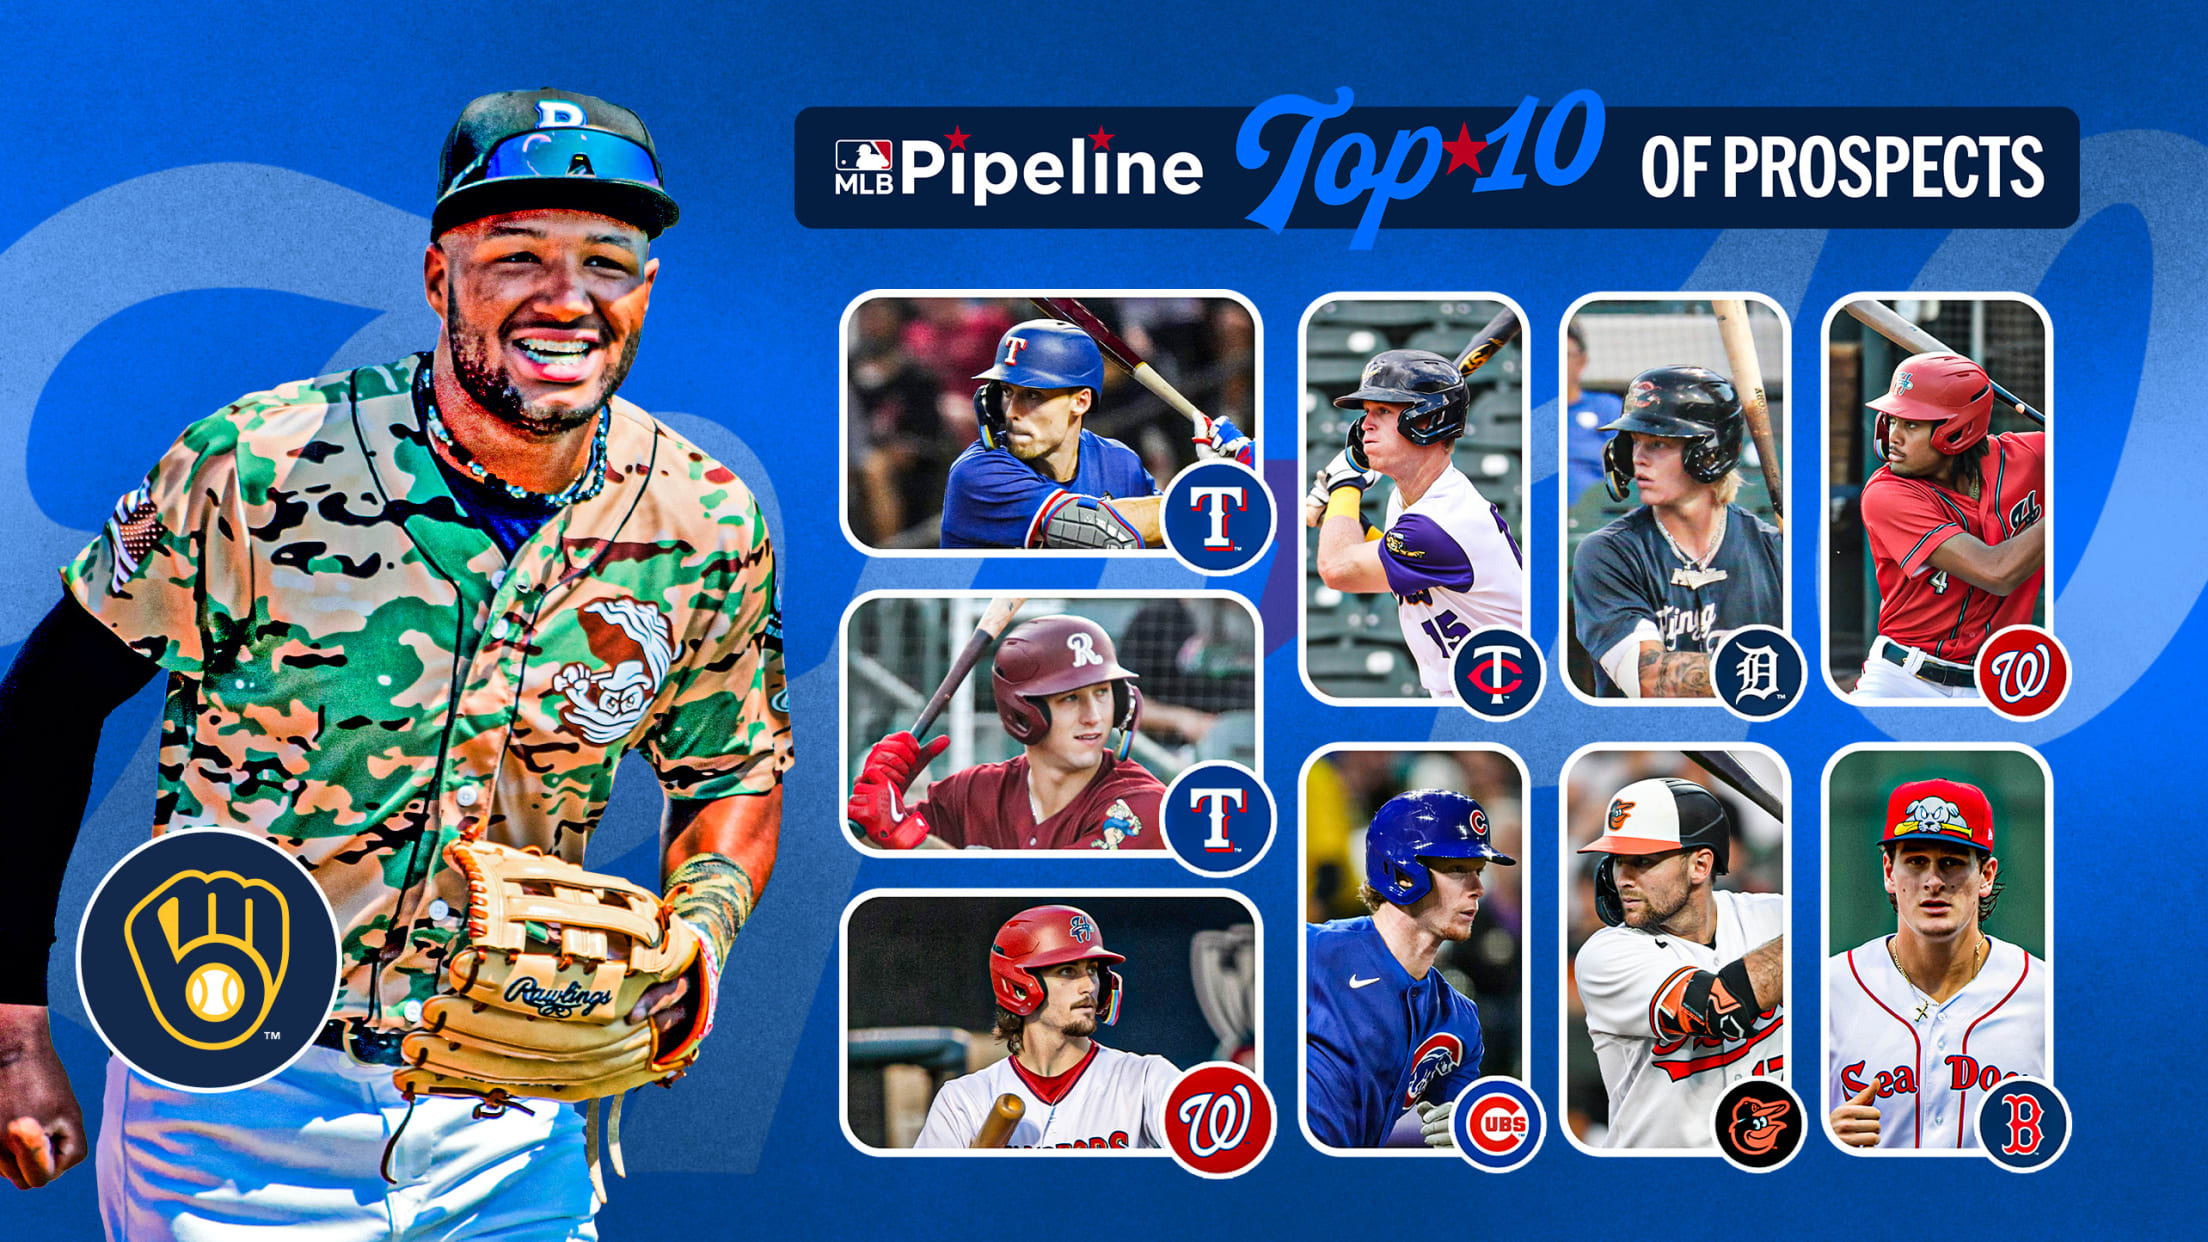 Jackson Chourio leads the list of Top 10 outfield prospects